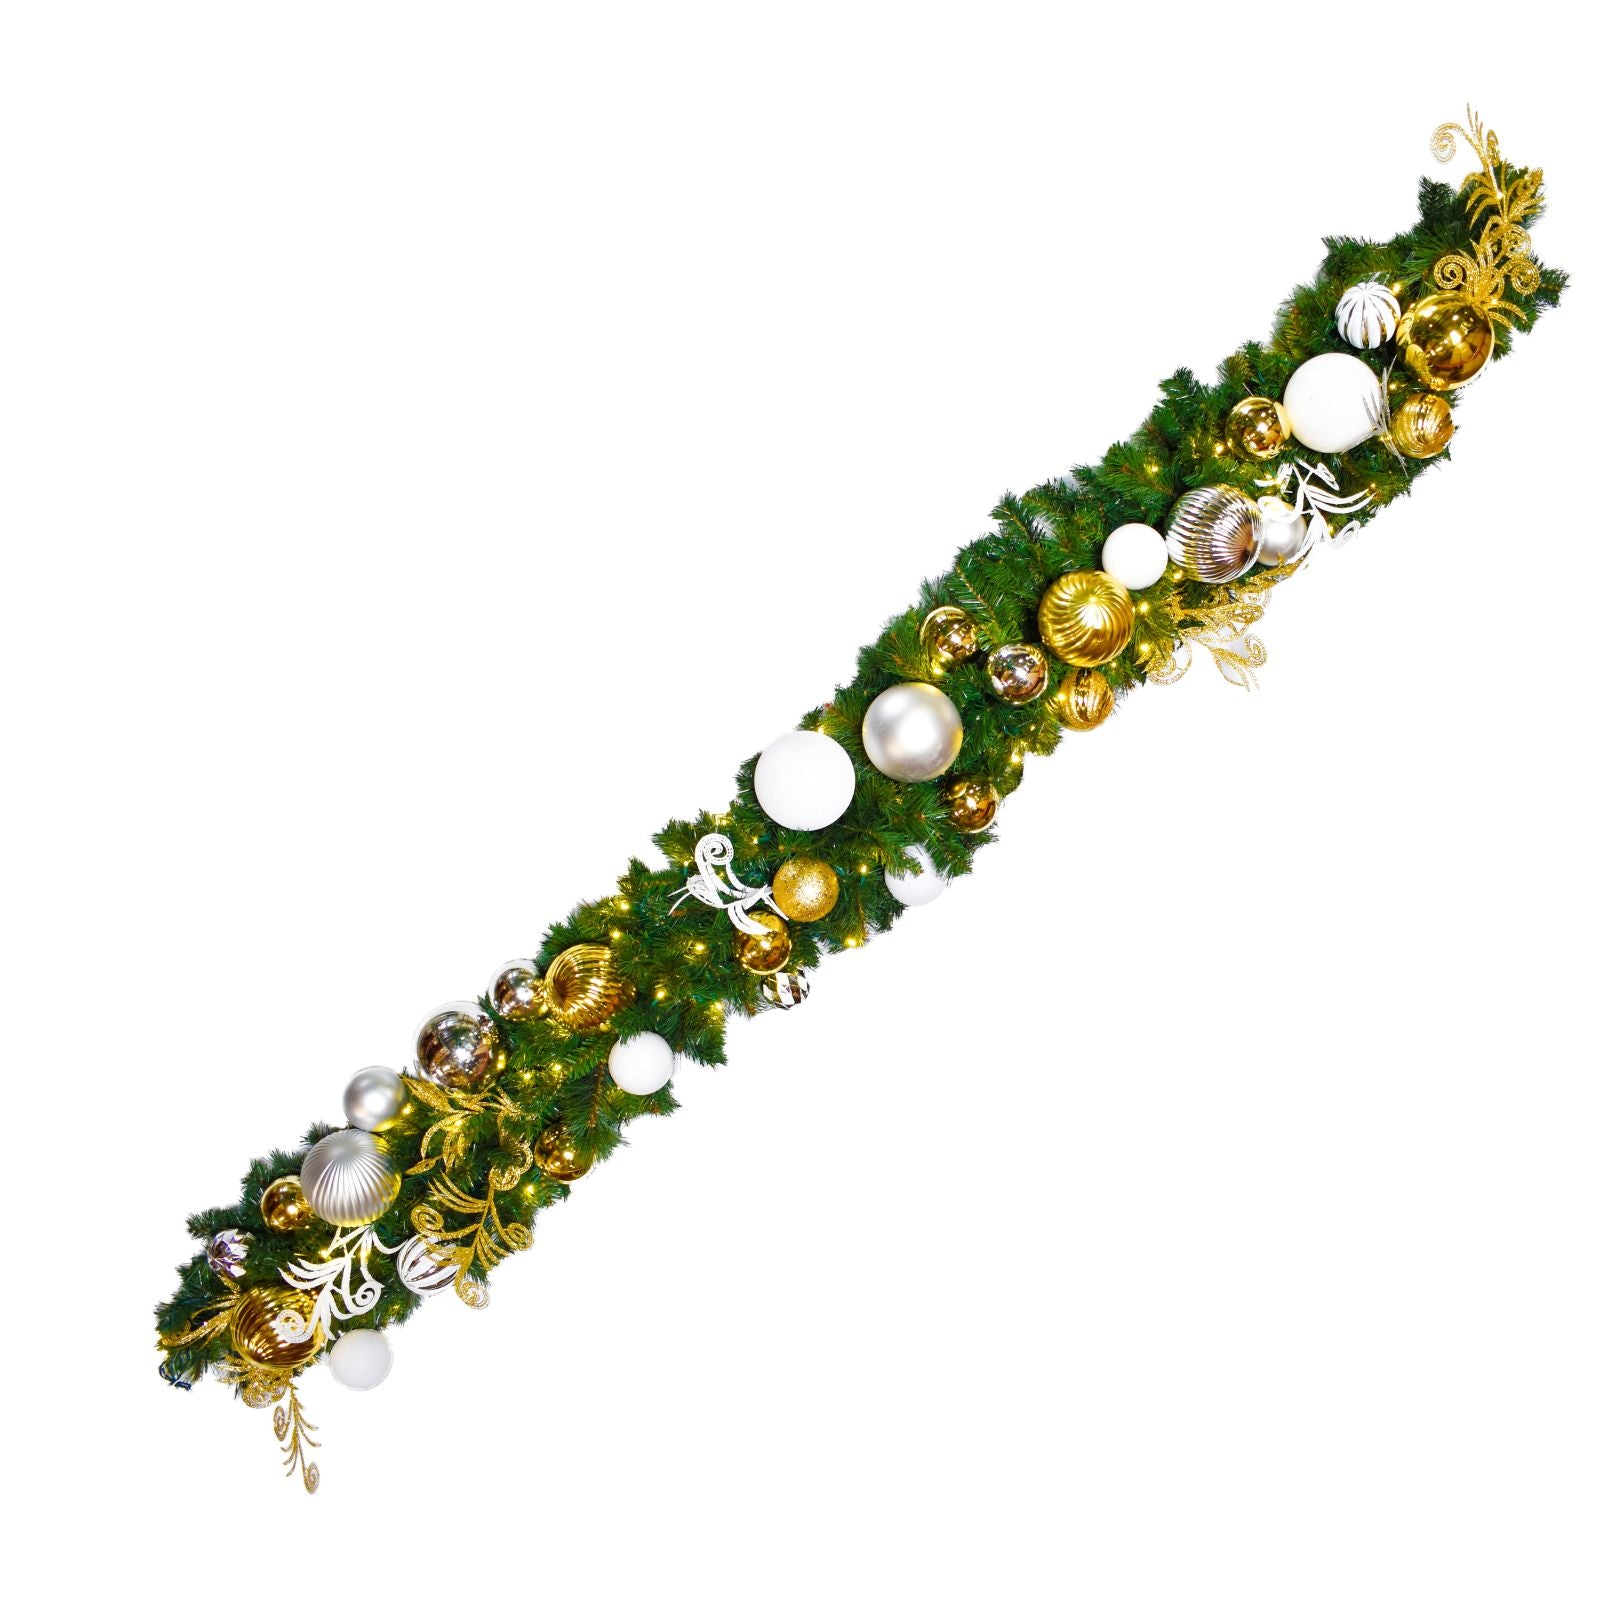 green-christmas-decor-garland-predecorated-gold-silver-and-white-w-warm-white-lights-9-x-14-st-nicks-CA